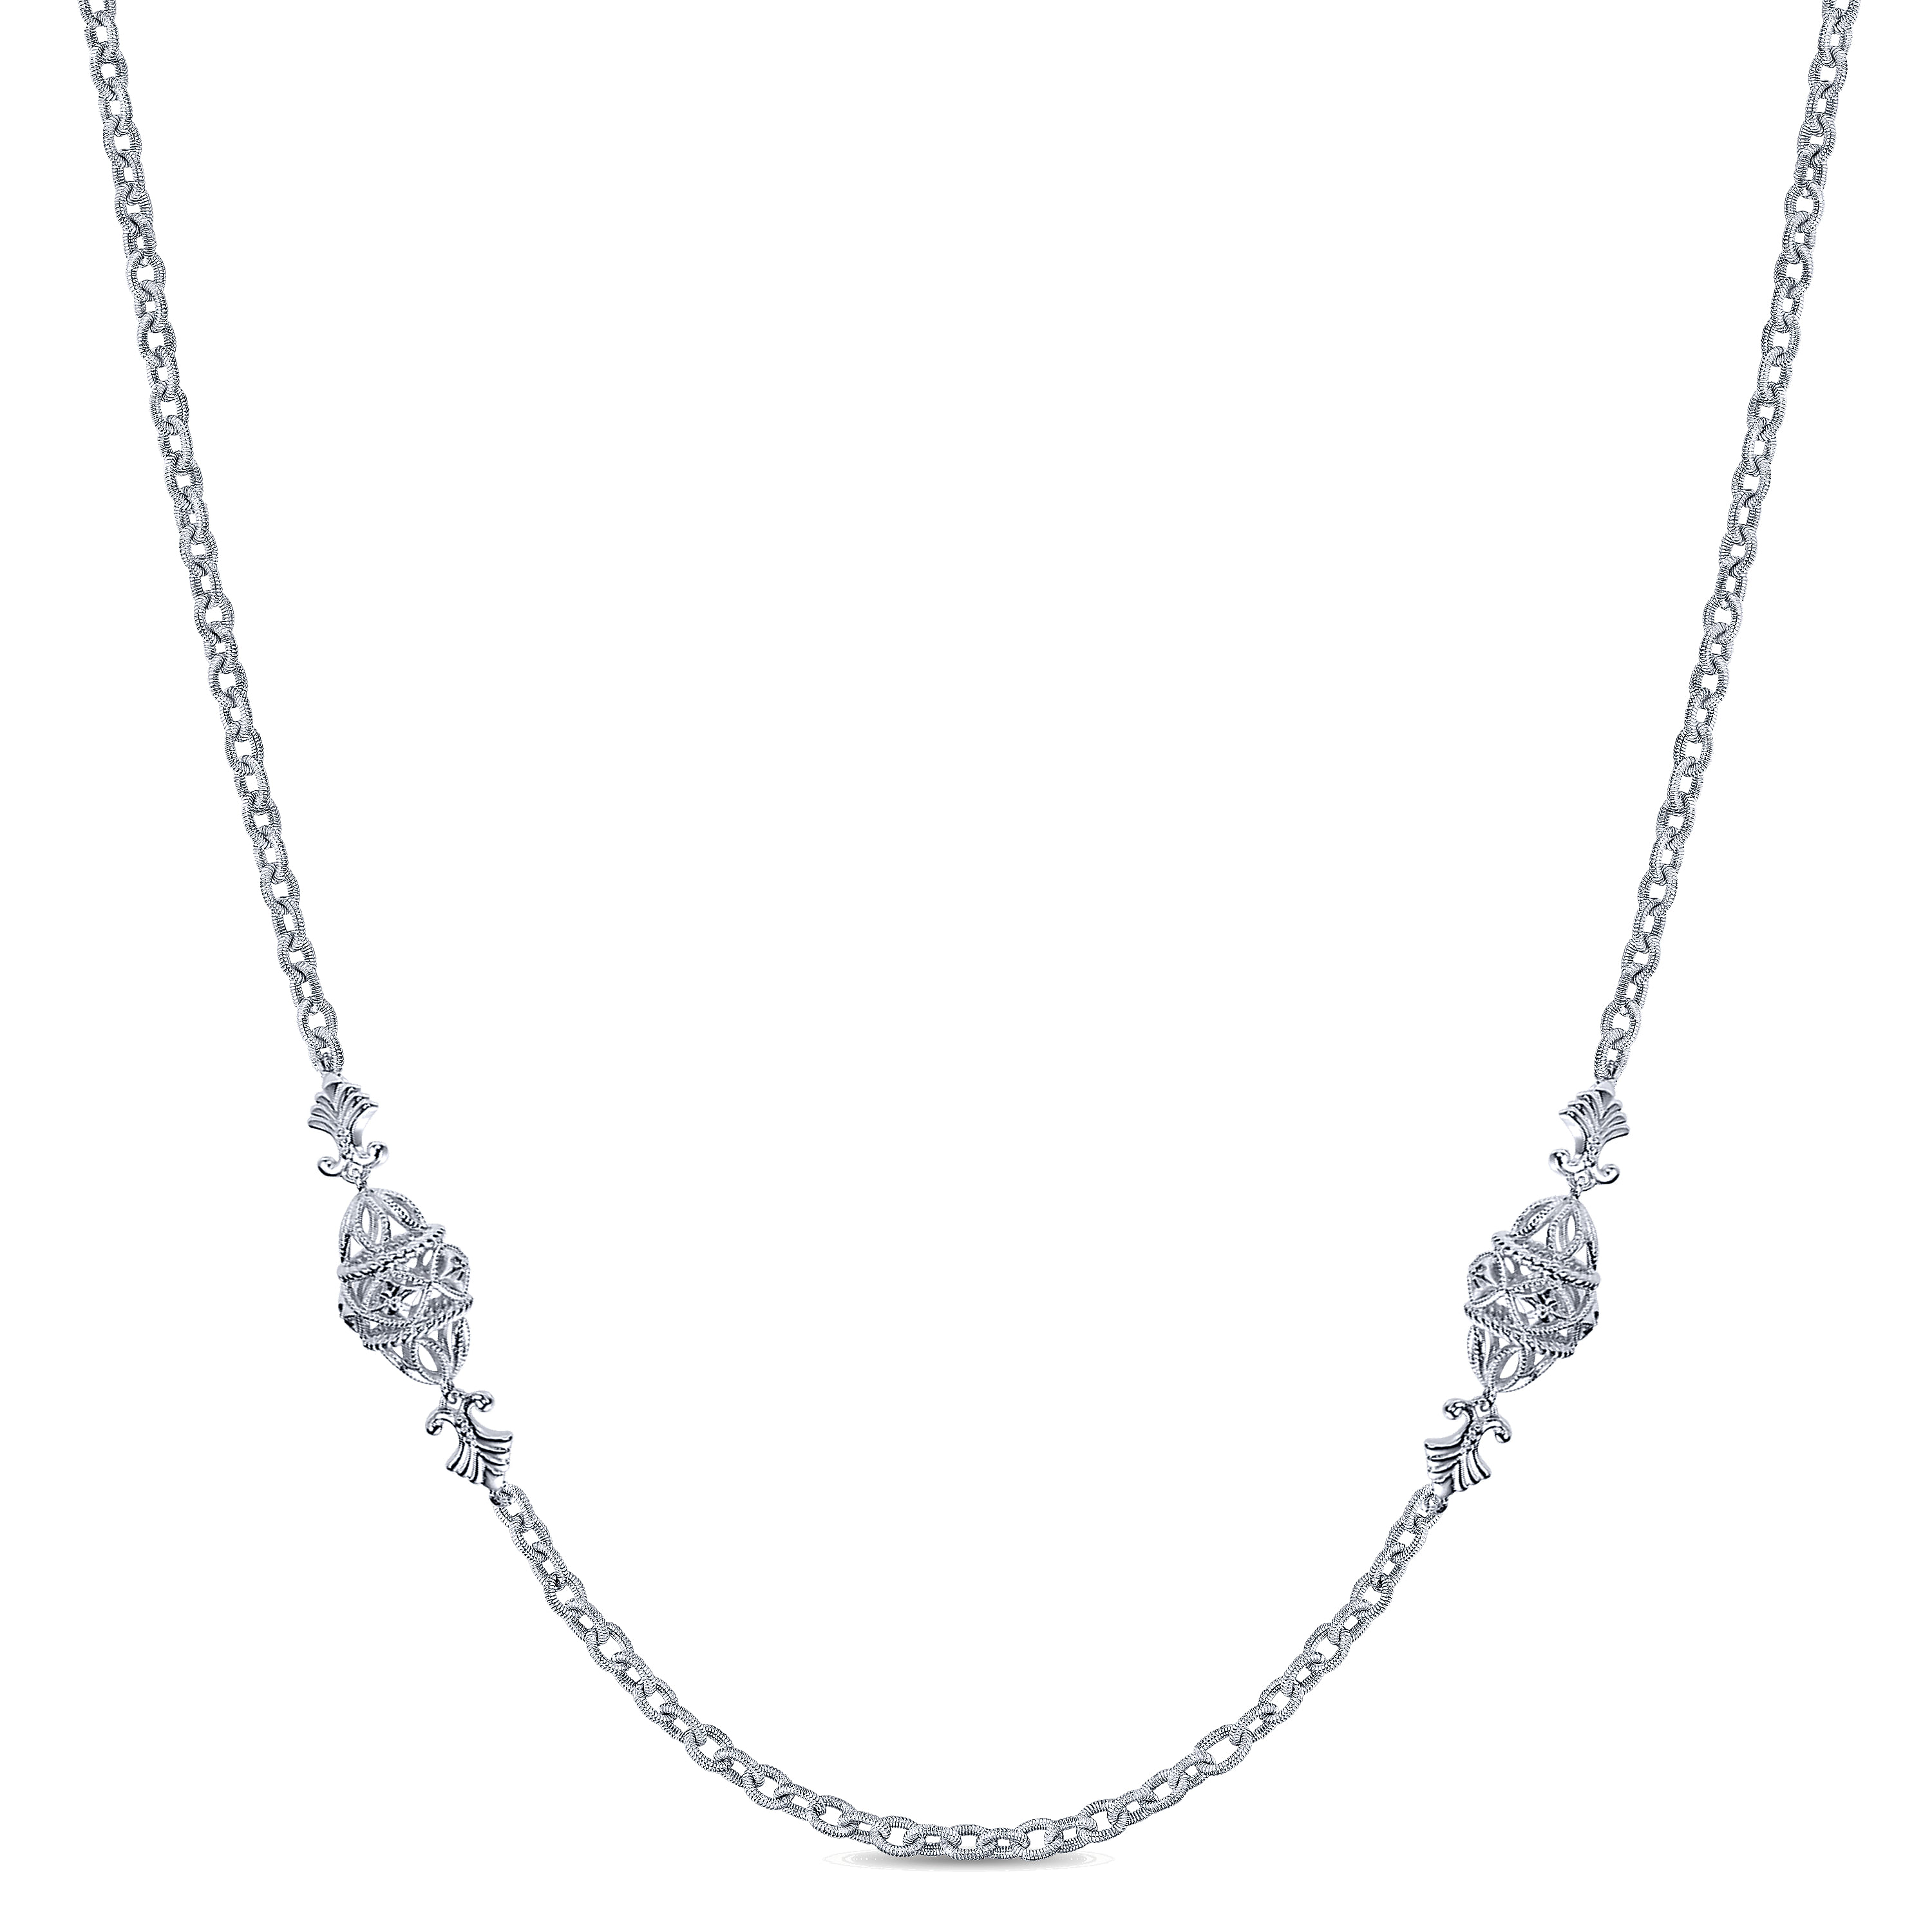 32 inch 925 Sterling Silver Filigree Bead Station Necklace